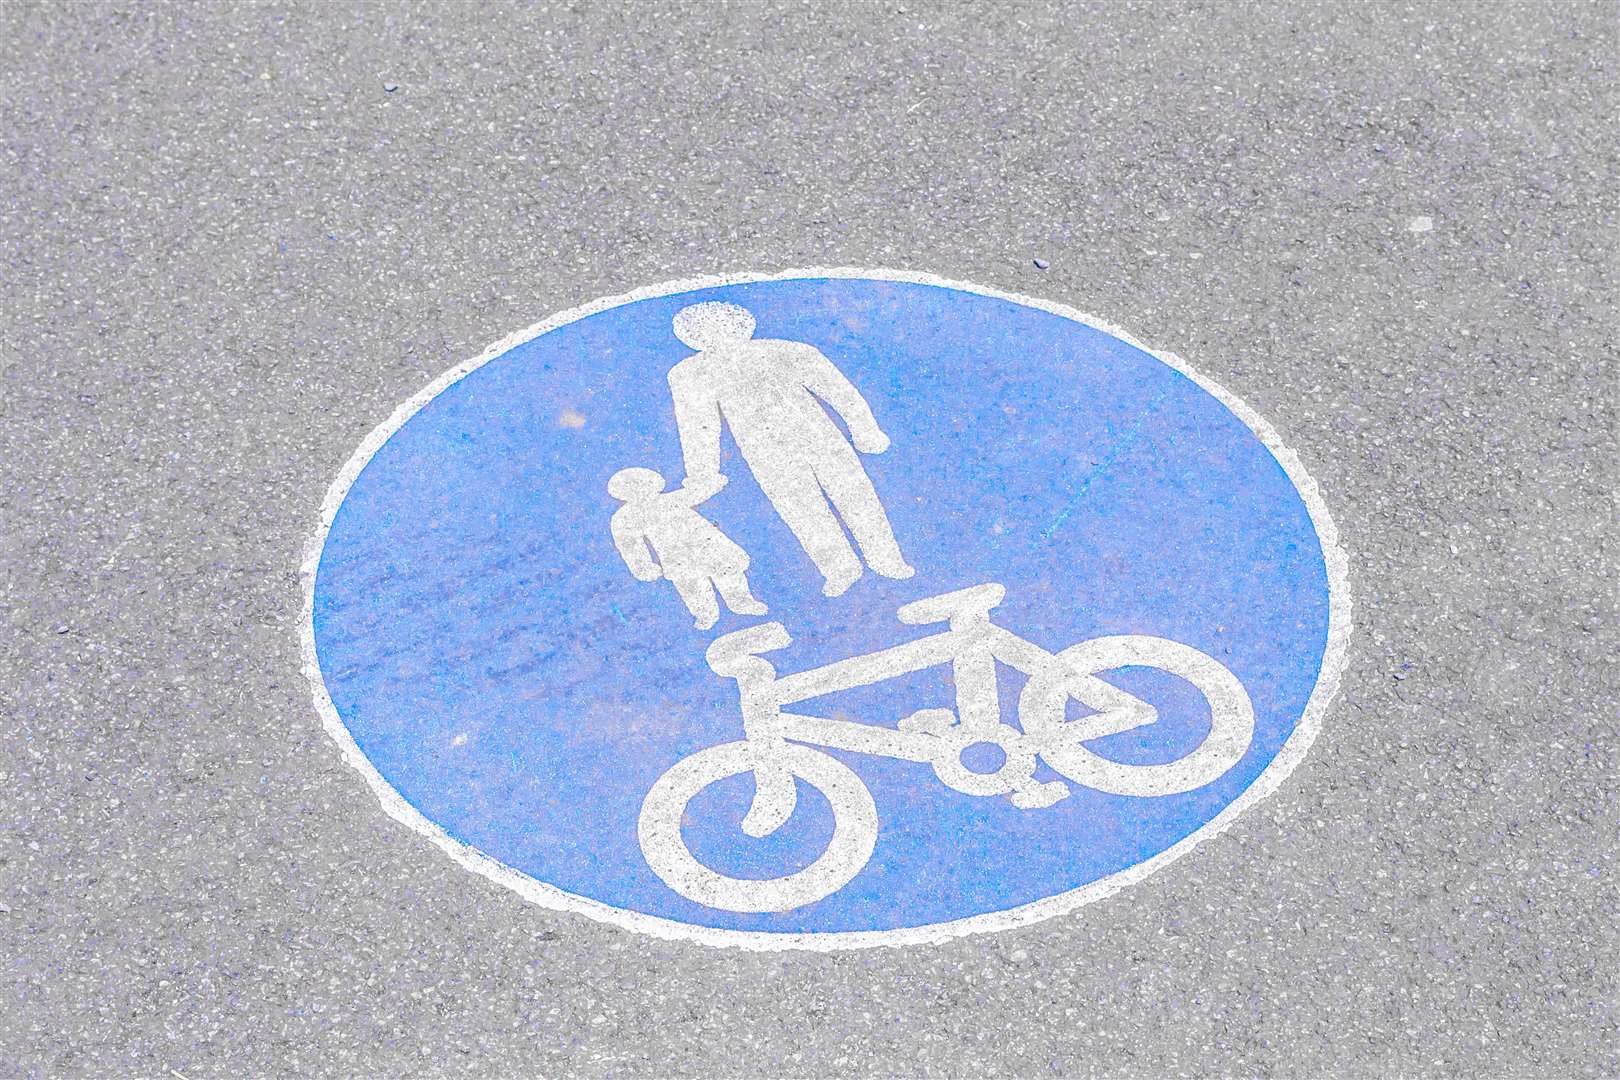 The proposed changes to the Highway Code are aimed at getting more people walking and cycling.